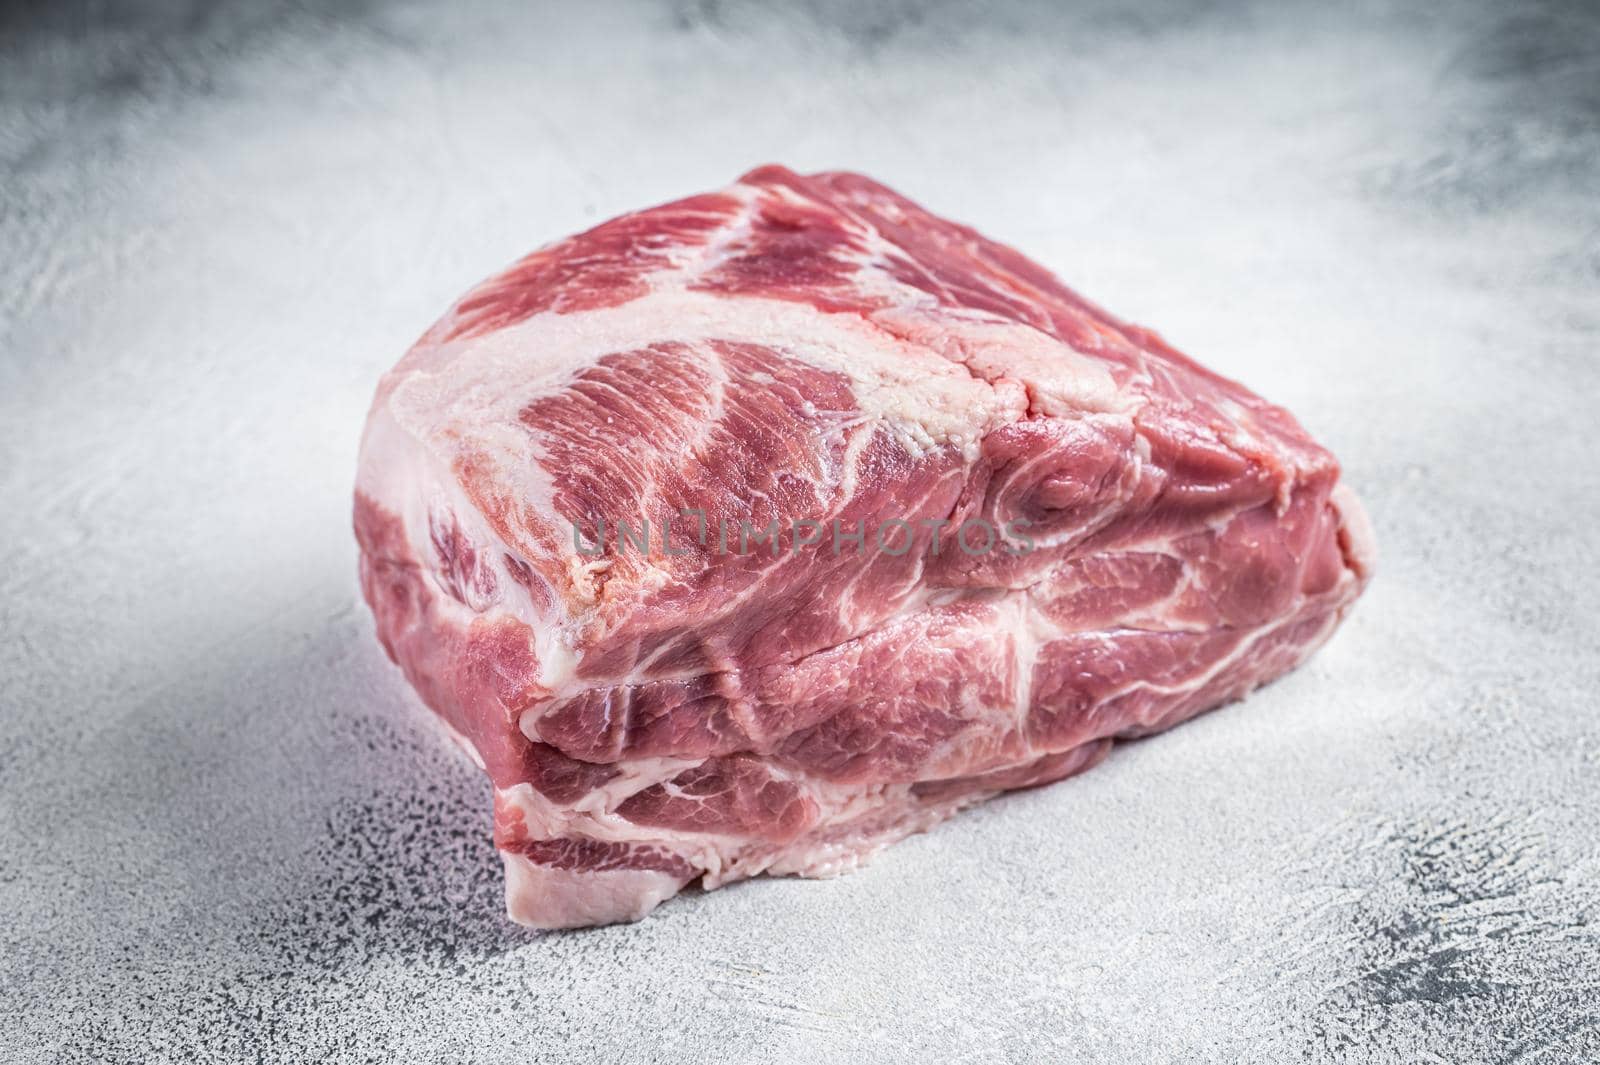 Raw pork neck meat for Chop steak on kichen table. White background. Top view.